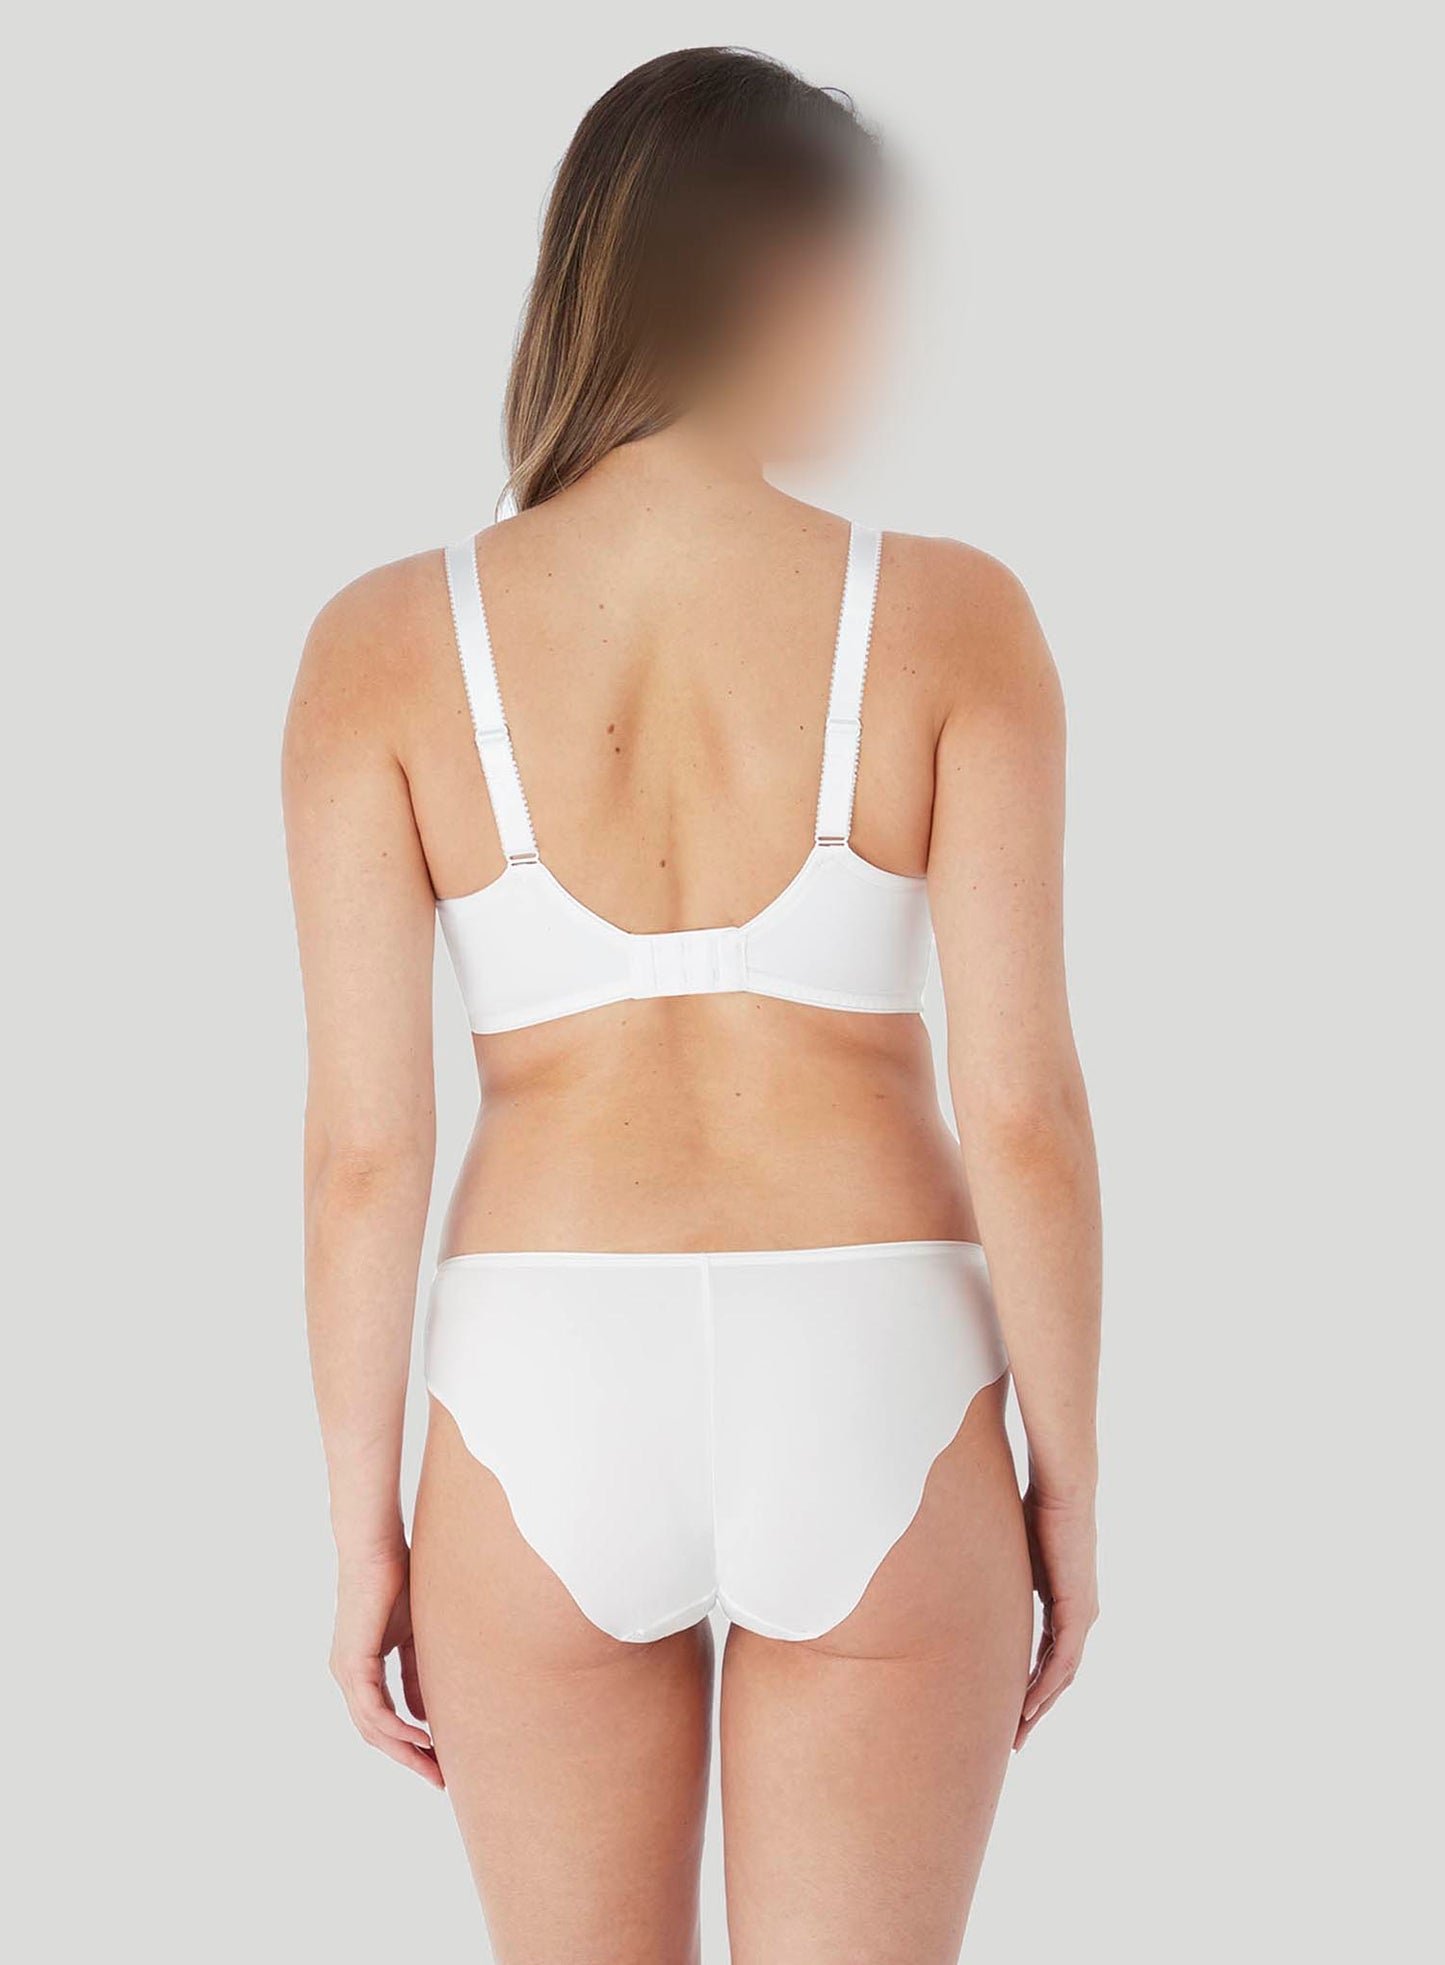 Fantasie: Ana Rebecca Moulded Spacer Full Cup Bra White